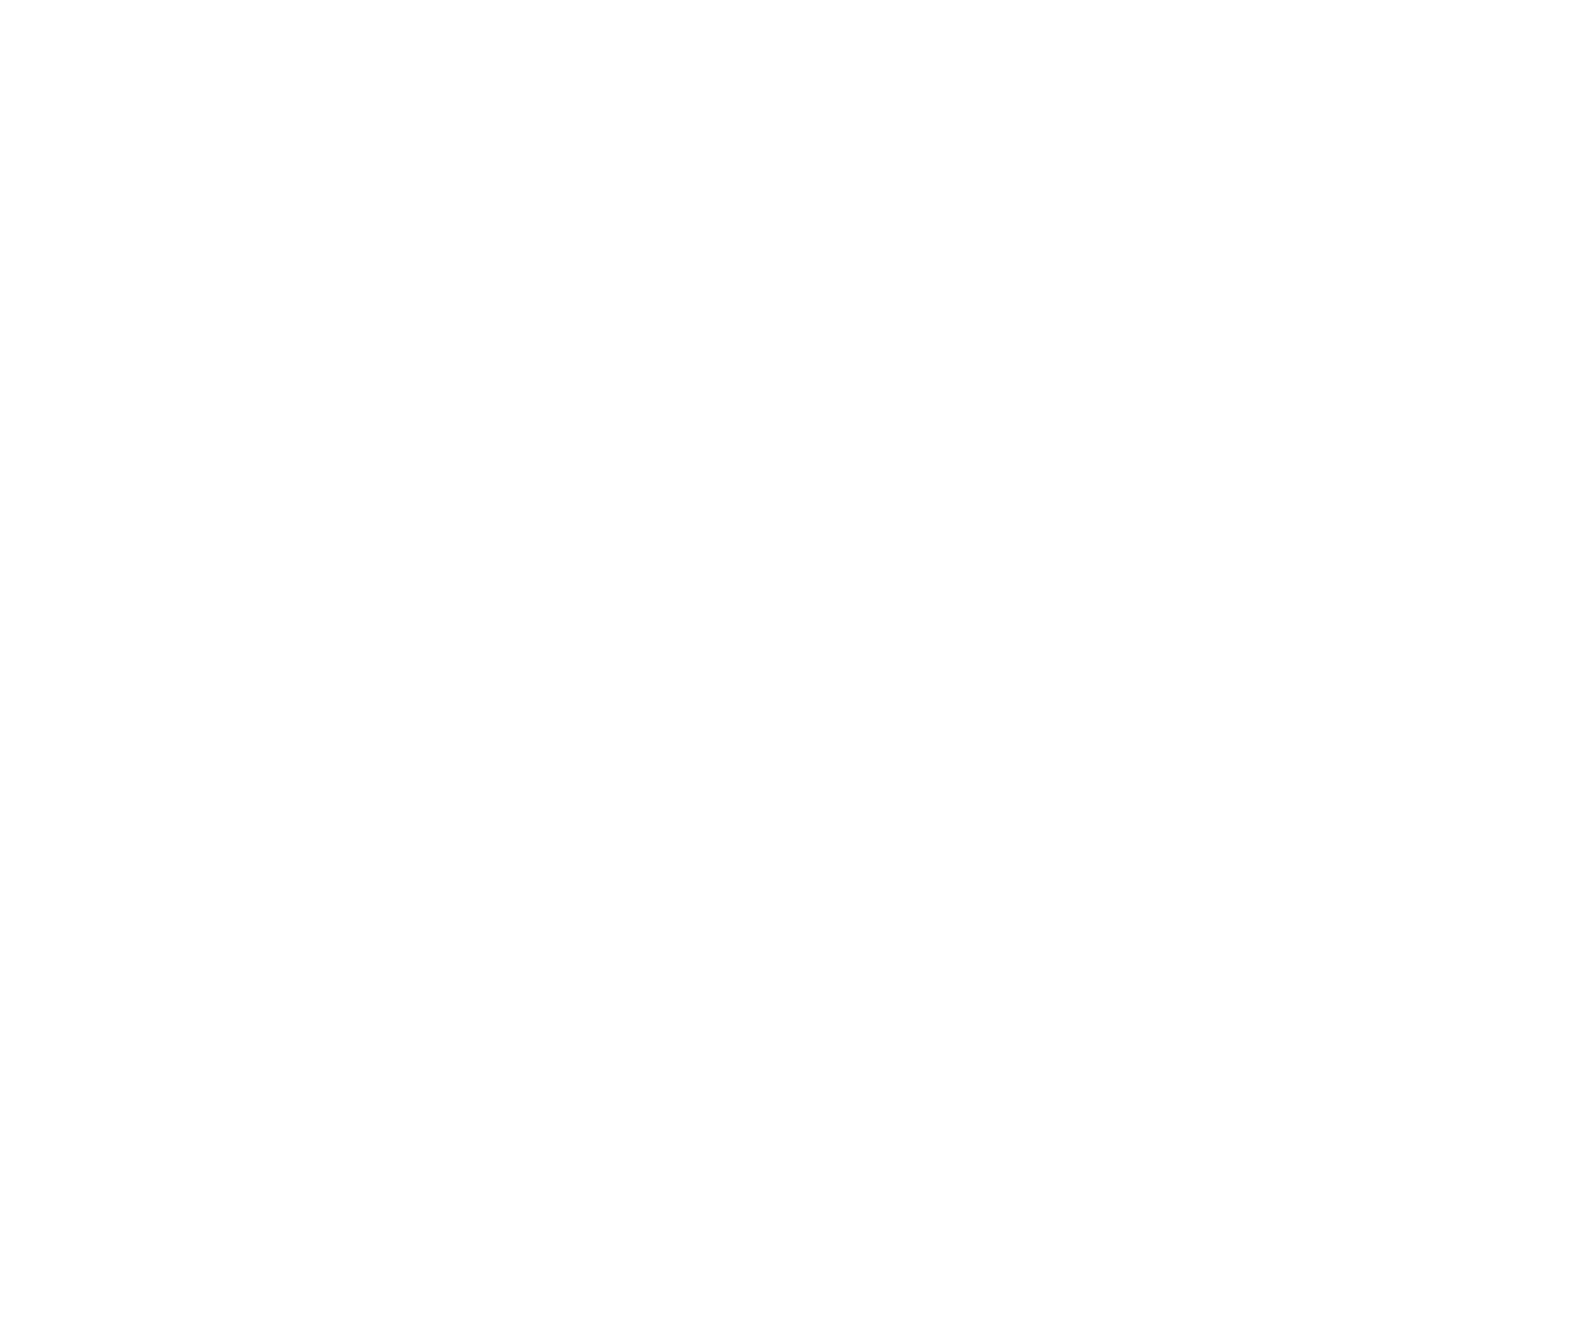 Combined Group Contracting Company  Logo groß für dunkle Hintergründe (transparentes PNG)